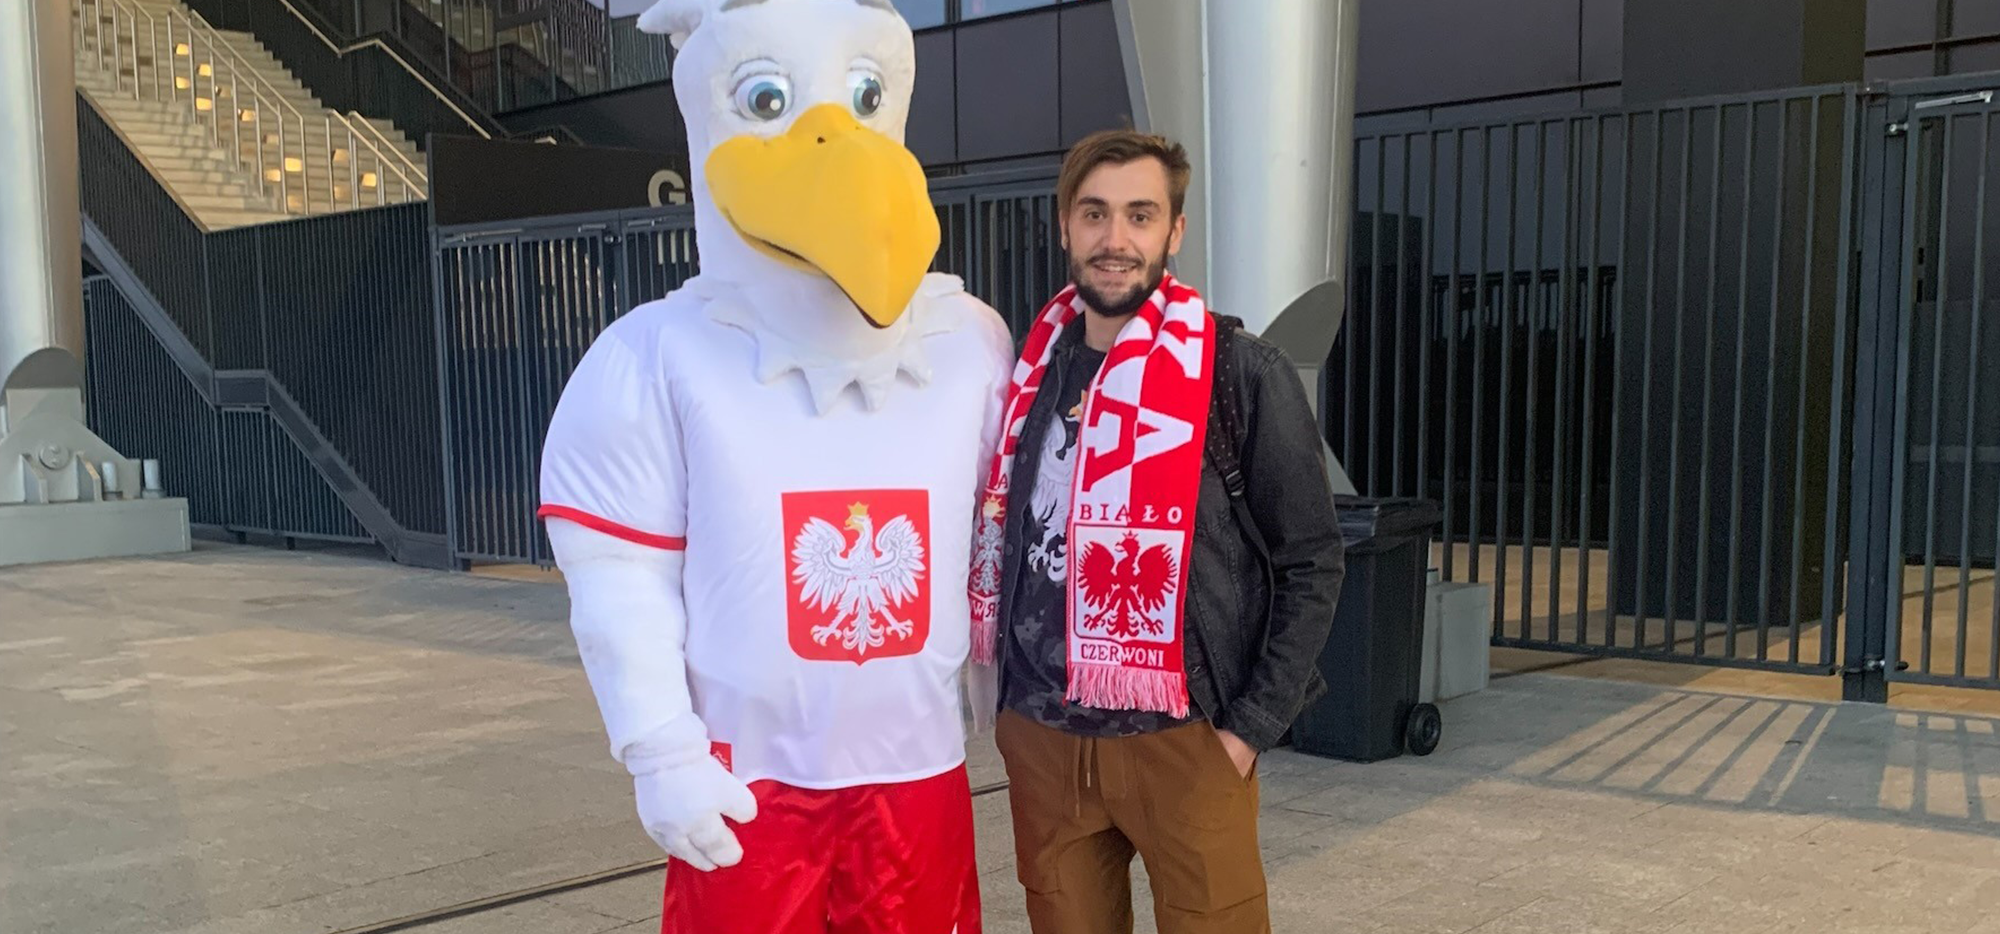 Jacob and the mascot for Poland's national football team